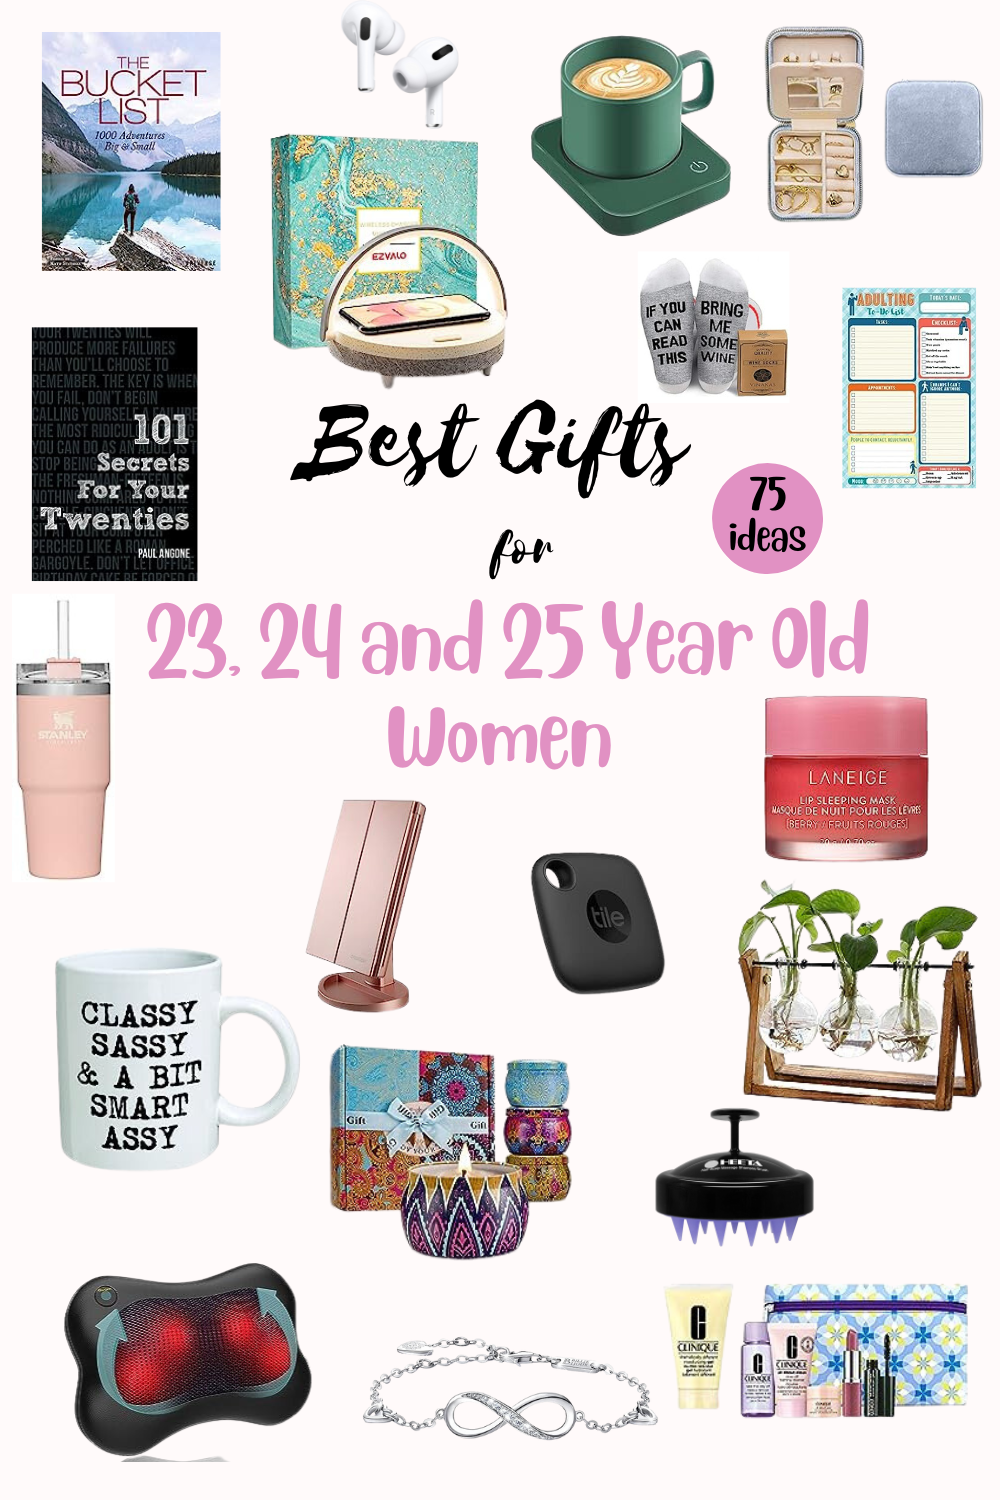 65 Best gifts for women 2024: Gift ideas for her she'll love | British GQ-gemektower.com.vn